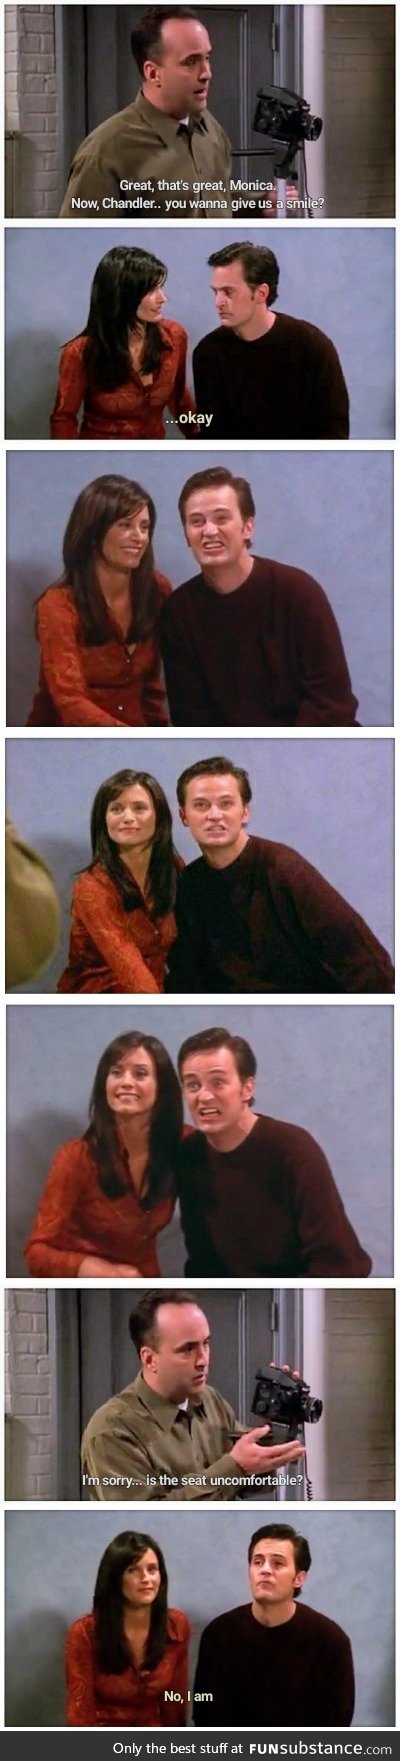 When people ask me to smile for the camera [Chandler Bing]